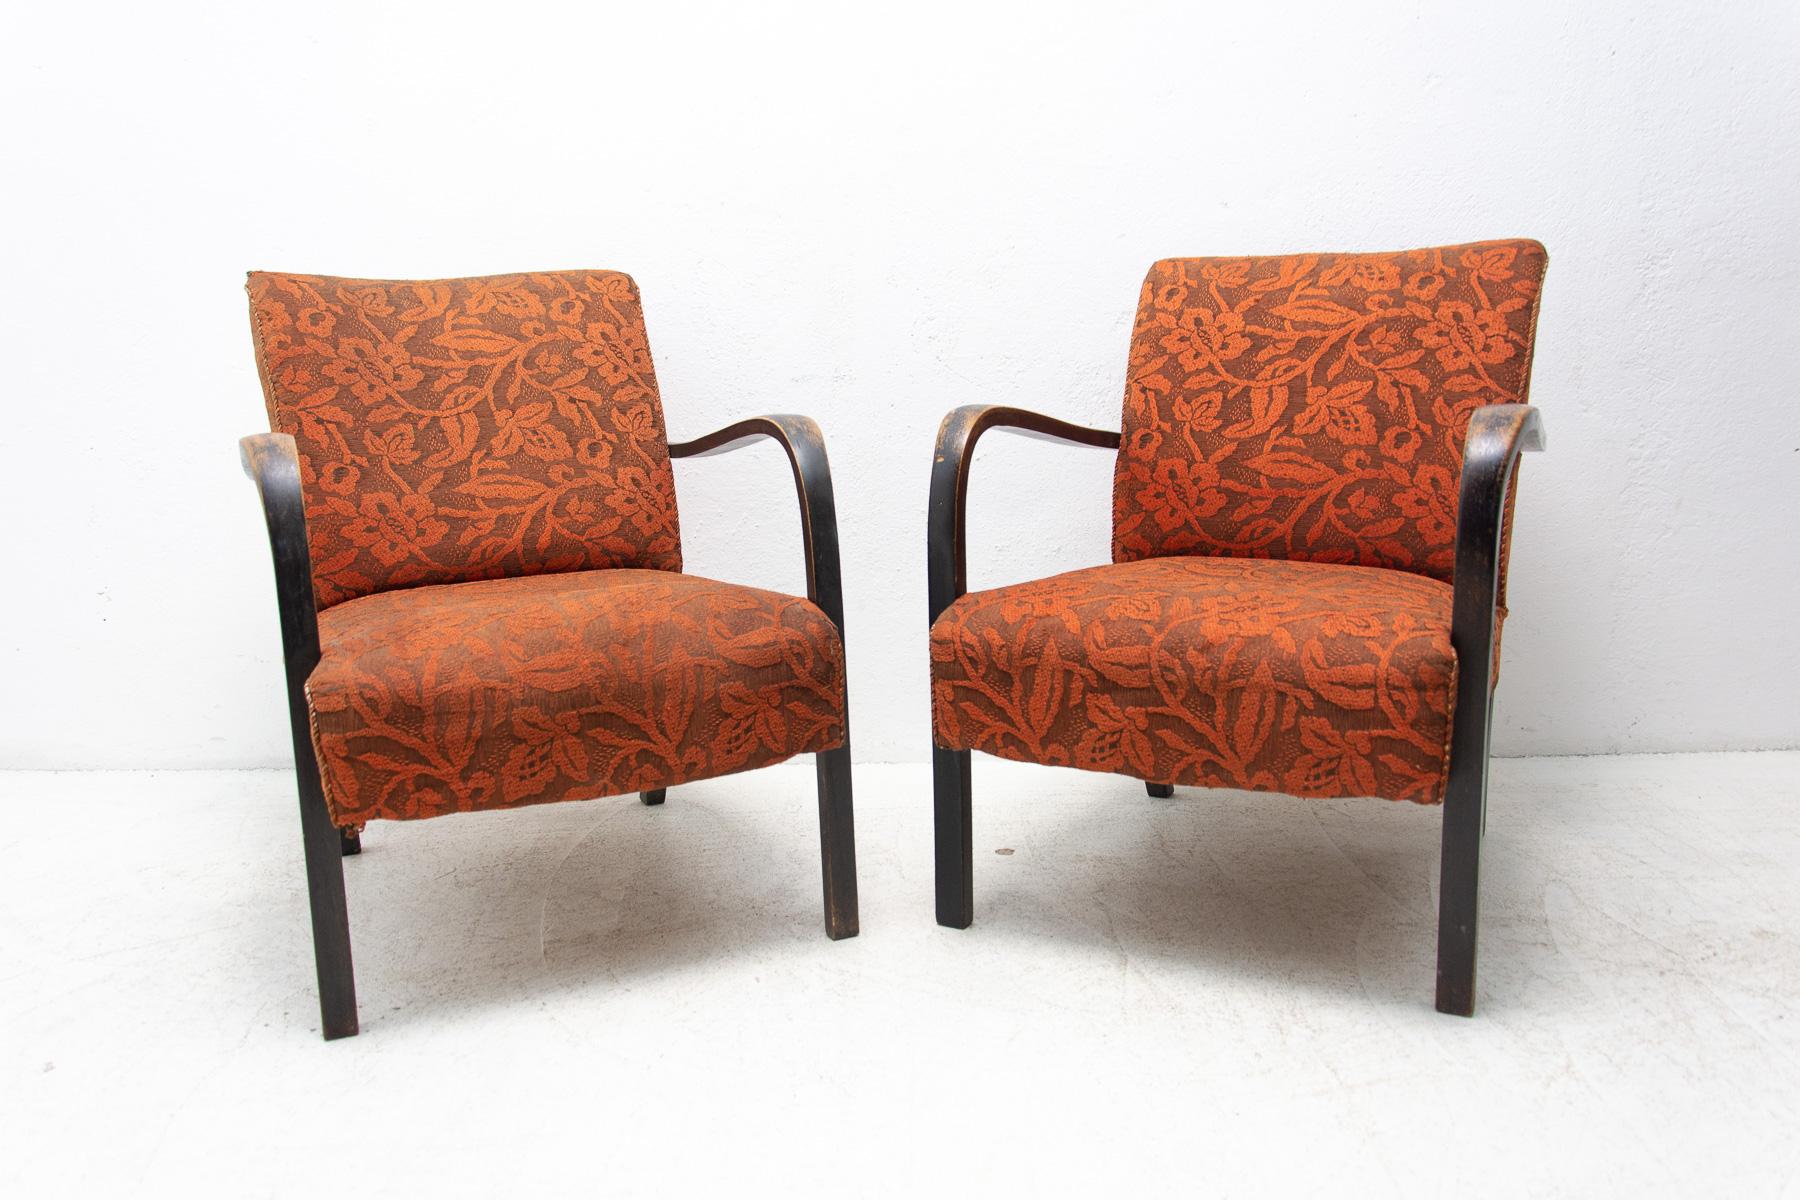 These Art Deco armchairs (cataloque No. B974) were made by Thonet in the former Czechoslovakia in the 1930’s.

Made of bent beechwood and upholstery.

They are in good Vintage condition, shows signs of age and using.

Price is for the